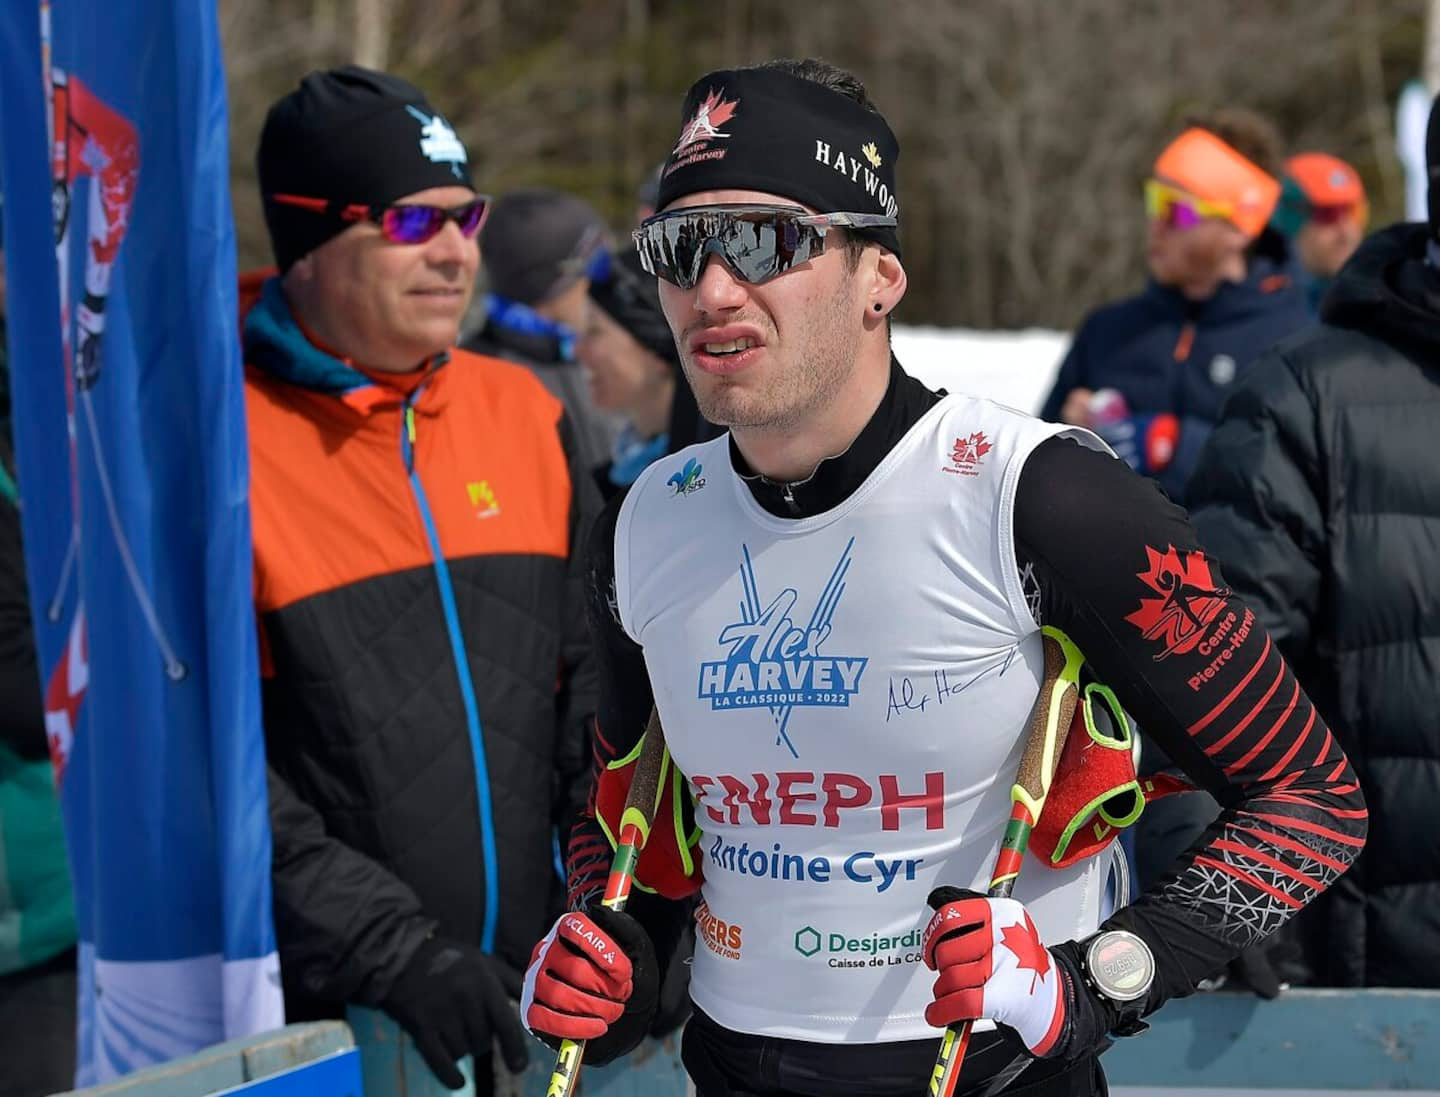 Cross-country skiing: memorable day for Quebec cross-country skiers